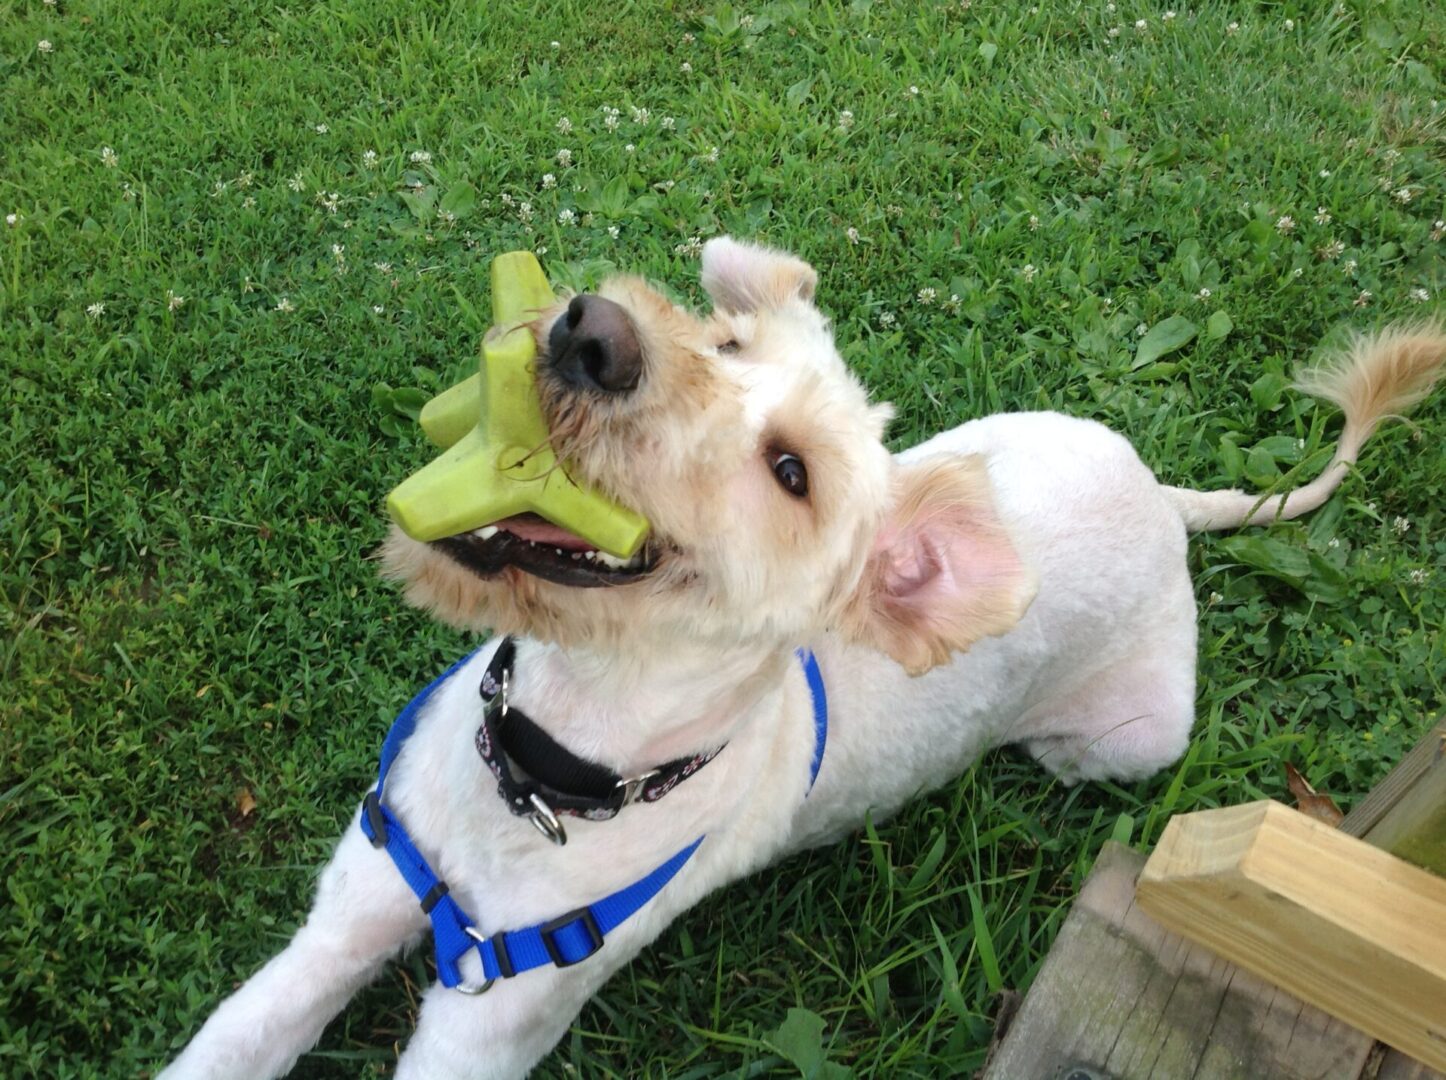 A light-colored dog wearing a blue harness holds a green toy in its mouth while sitting on grass.